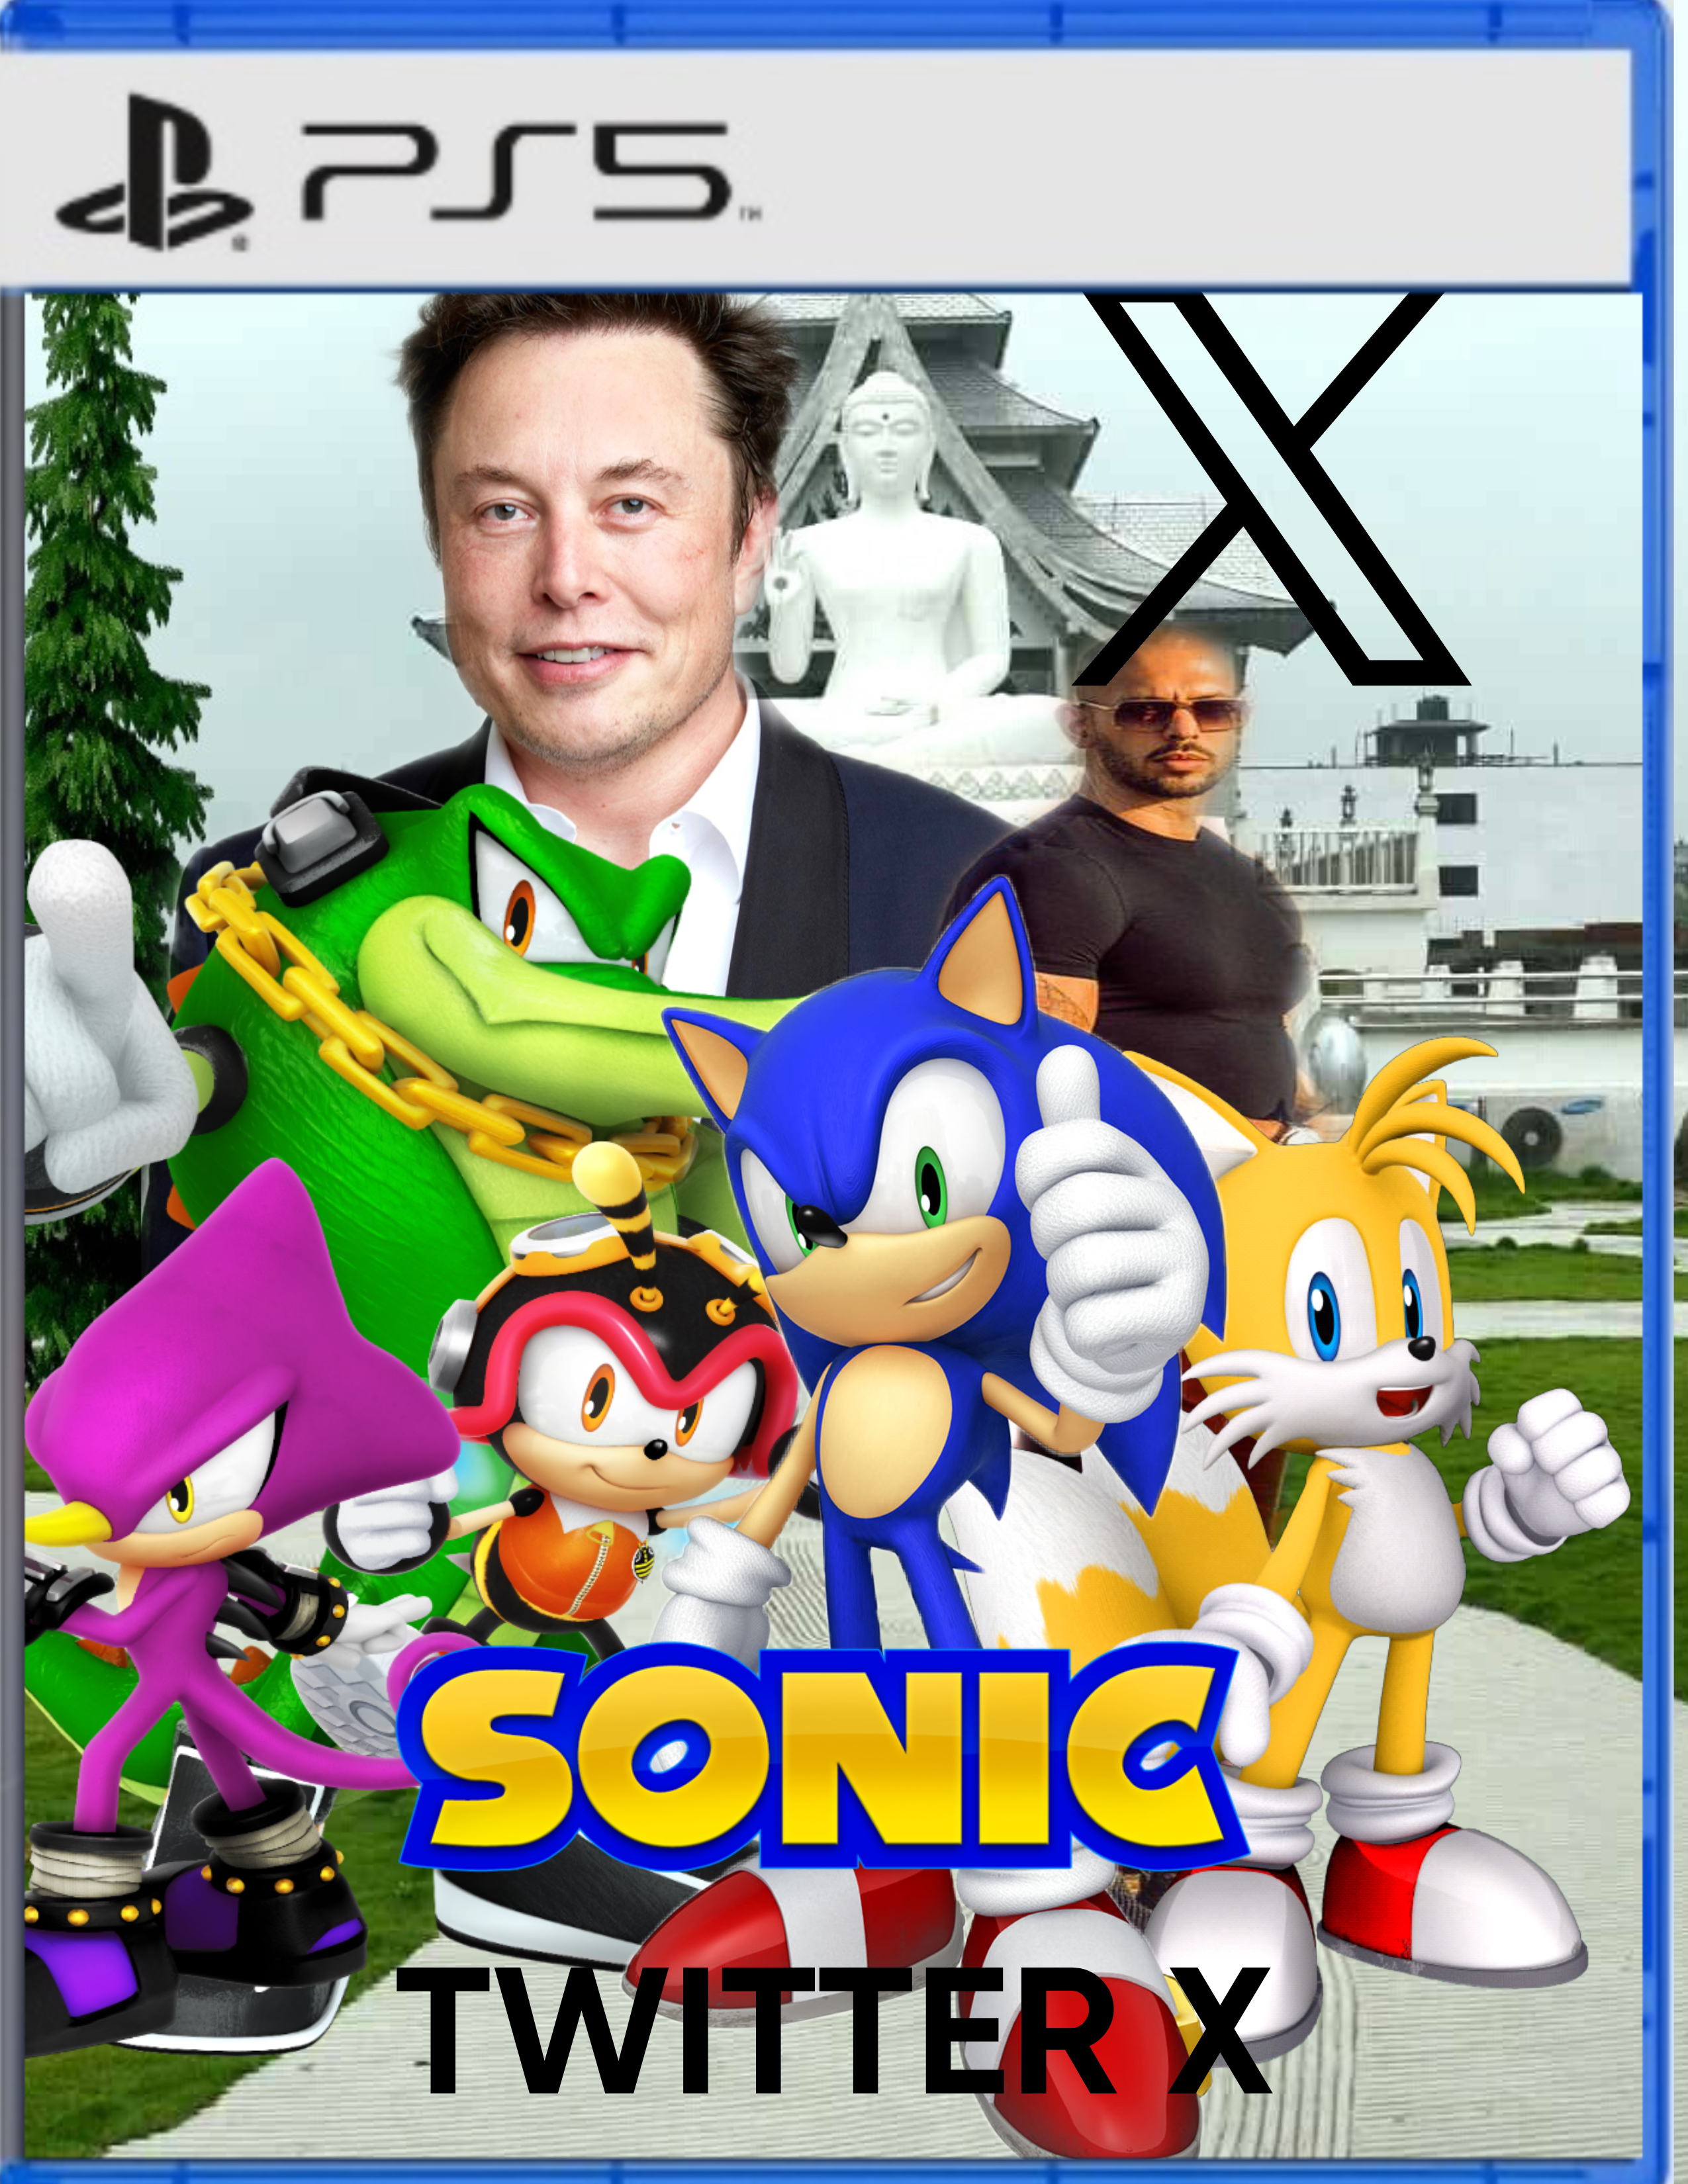 Sonic movienews on X: Welcome to my official Twitter account